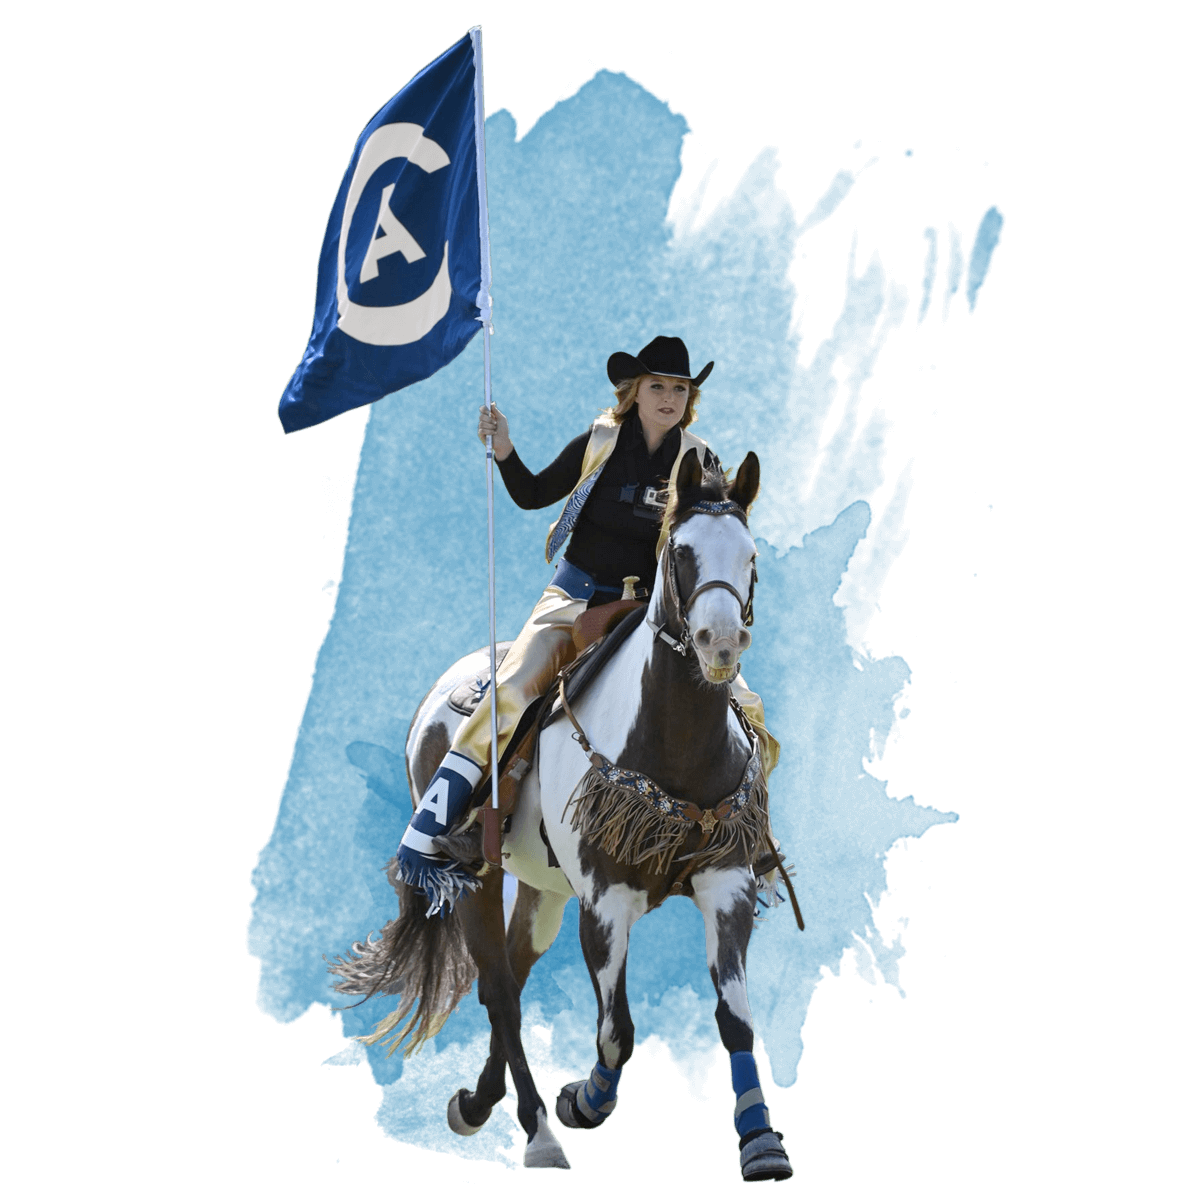 Maggie the Aggie riding her UC Davis branded horse out onto the football field